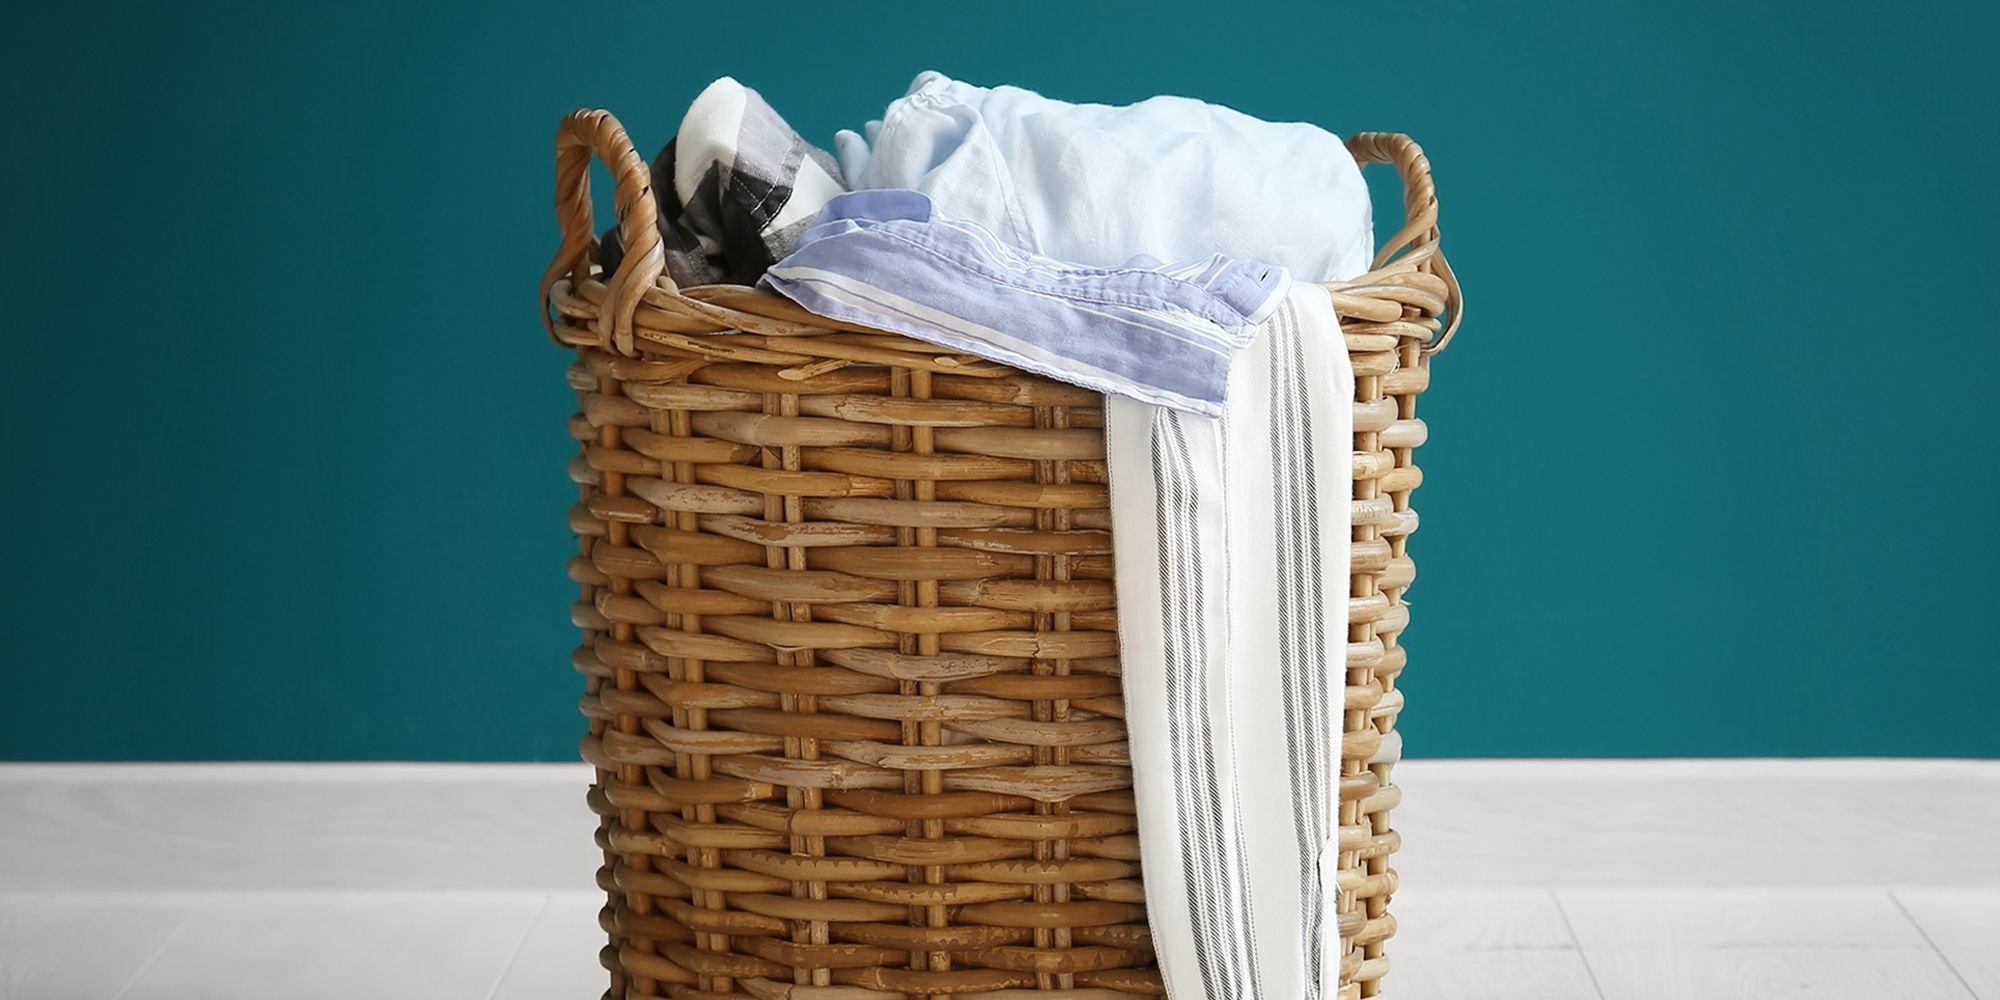 his and hers laundry basket